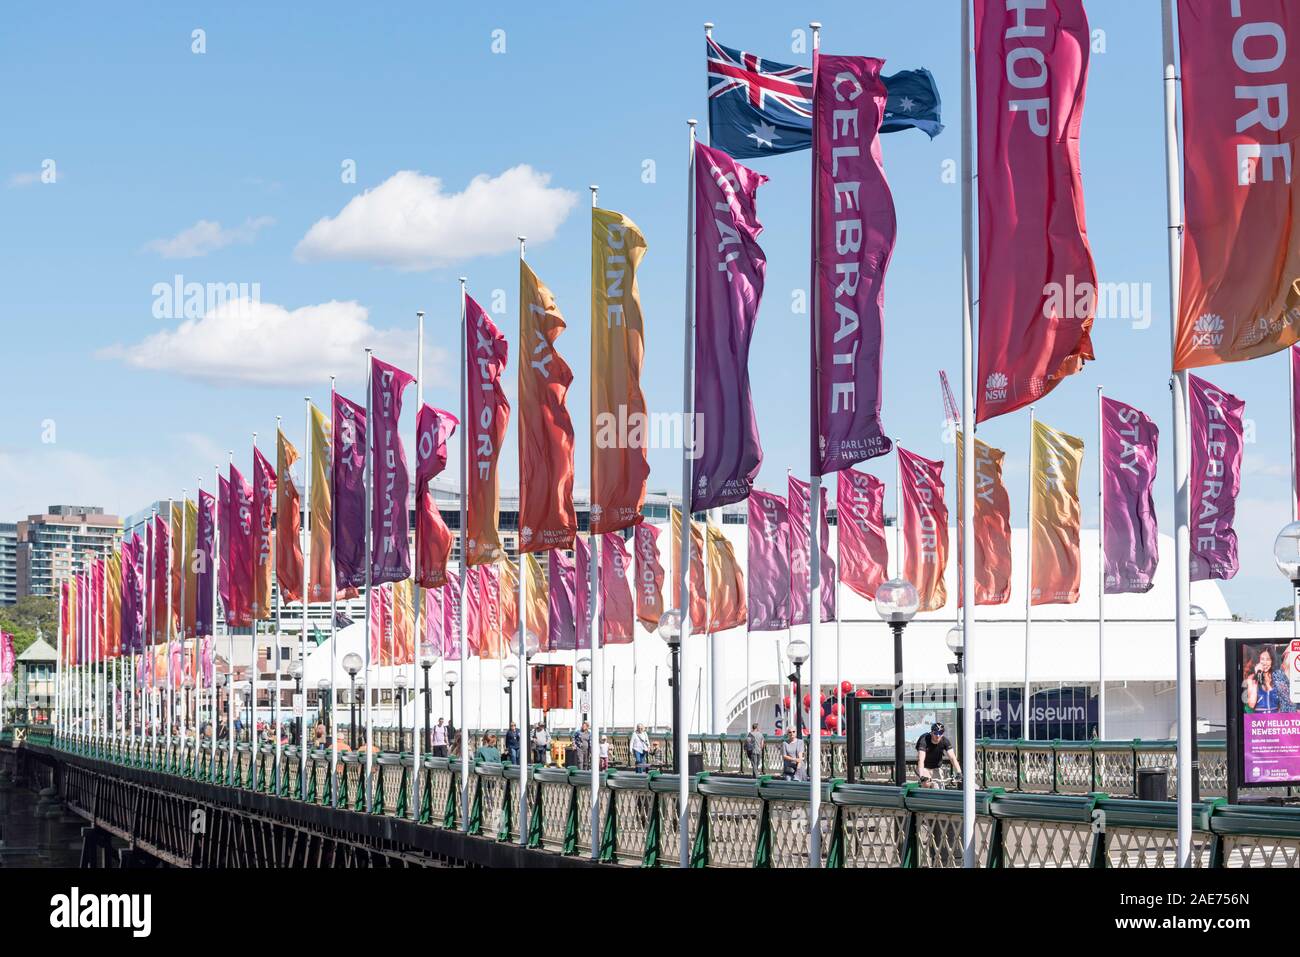 Multi coloured banner flags flutter in a strong morning wind blowing across the historic Pyrmont Bridge at Sydney's Darling Harbour precinct Stock Photo